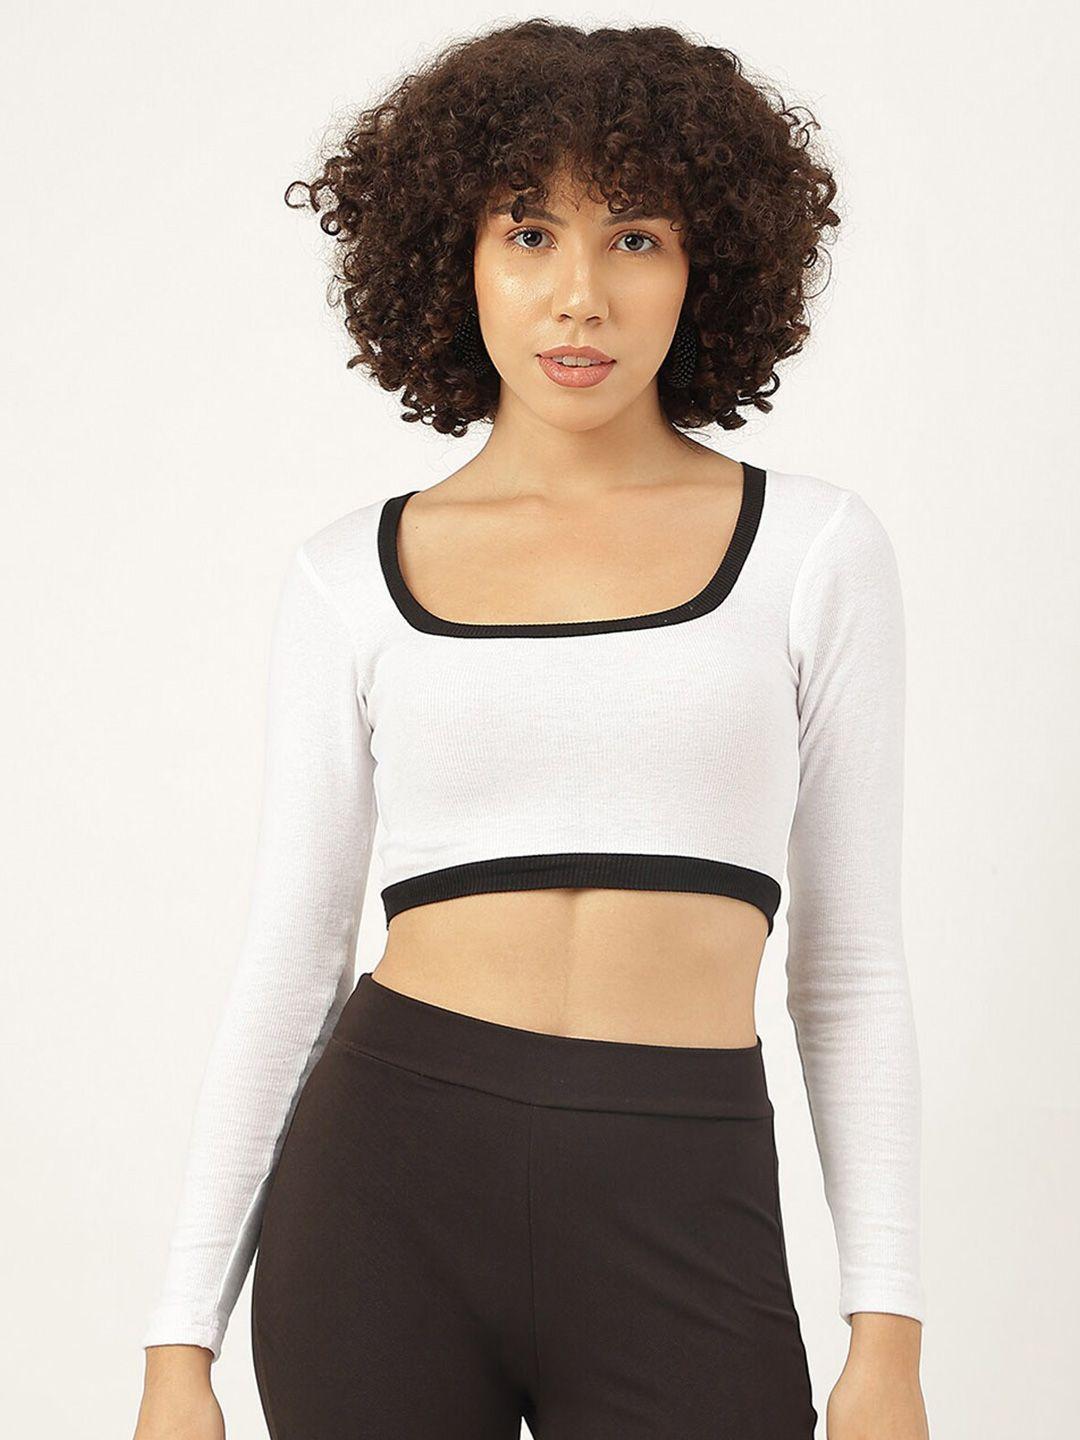 AAHWAN Square Neck Long Sleeves Fitted Cotton Crop Top